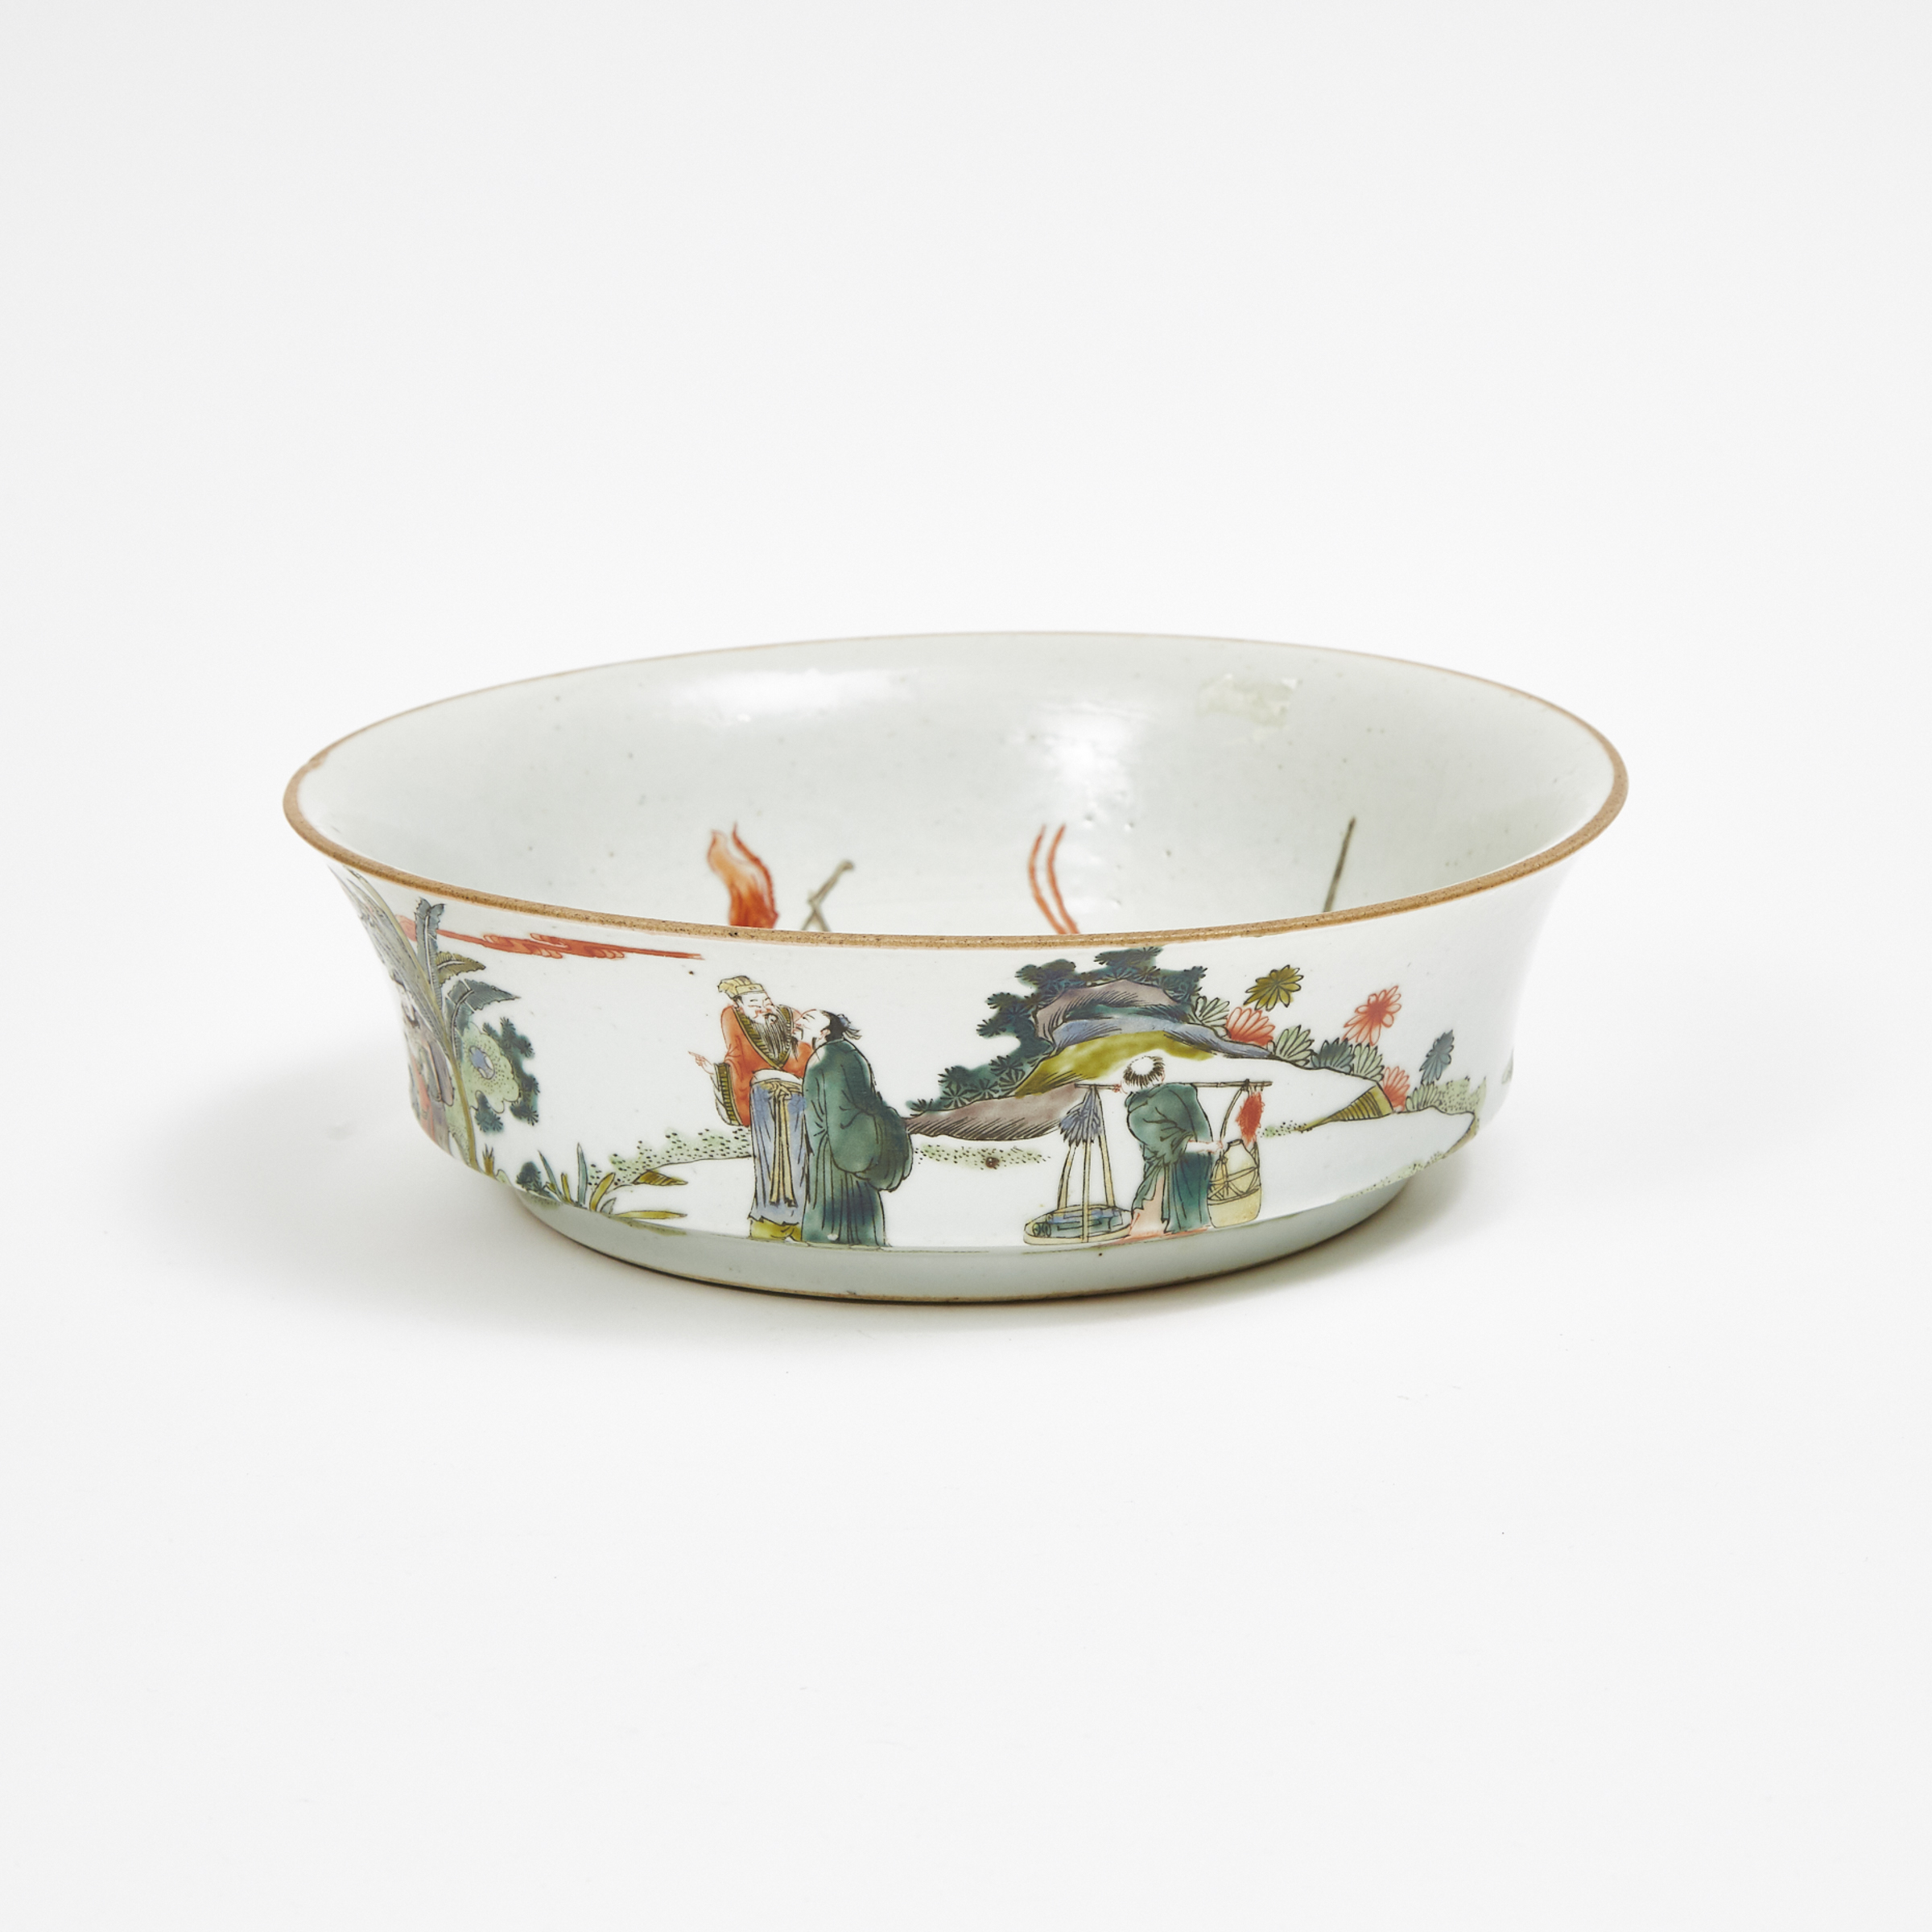 An Enameled Shallow Bowl, 19th Century